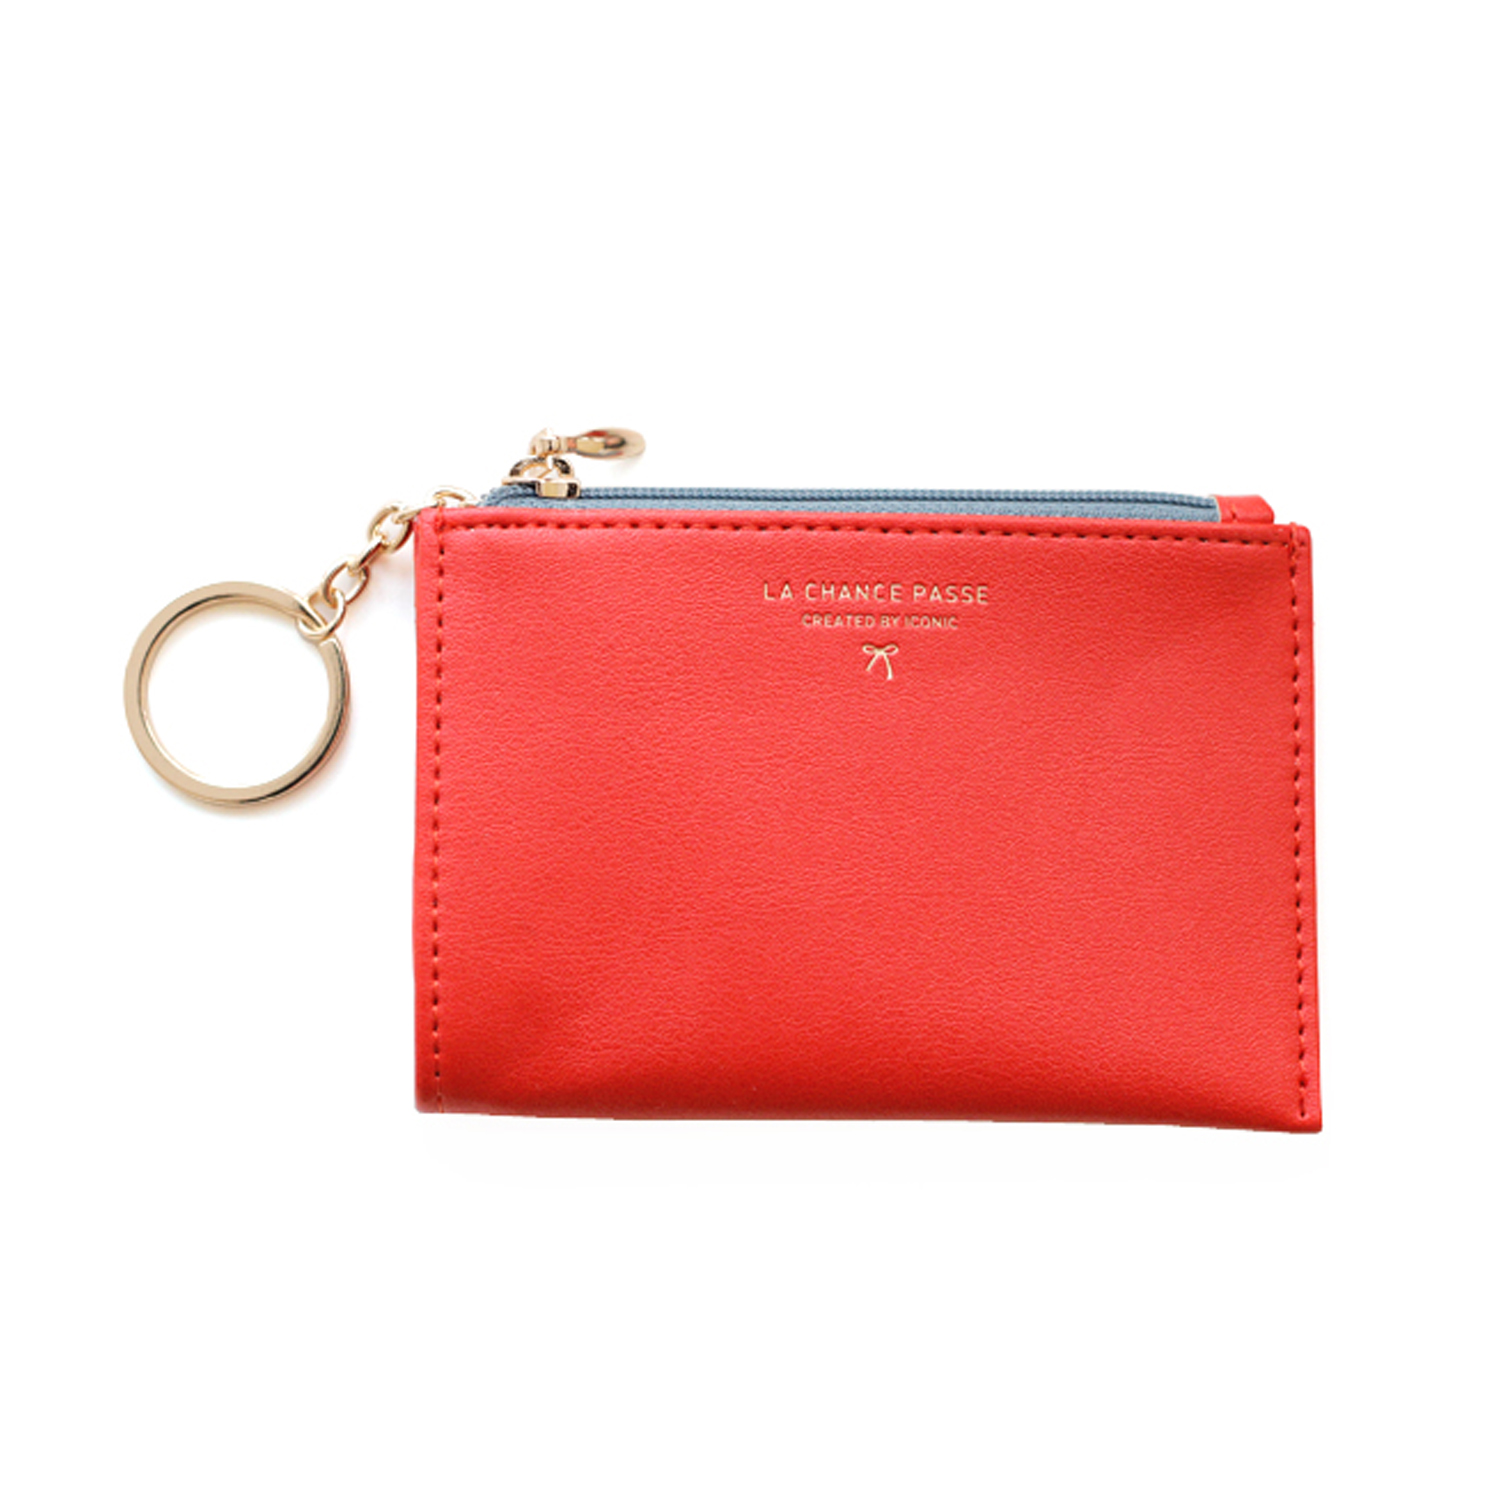 Buy Iconic Key Coin Wallet - Vermilion in Malaysia - The Wallet Shop MY